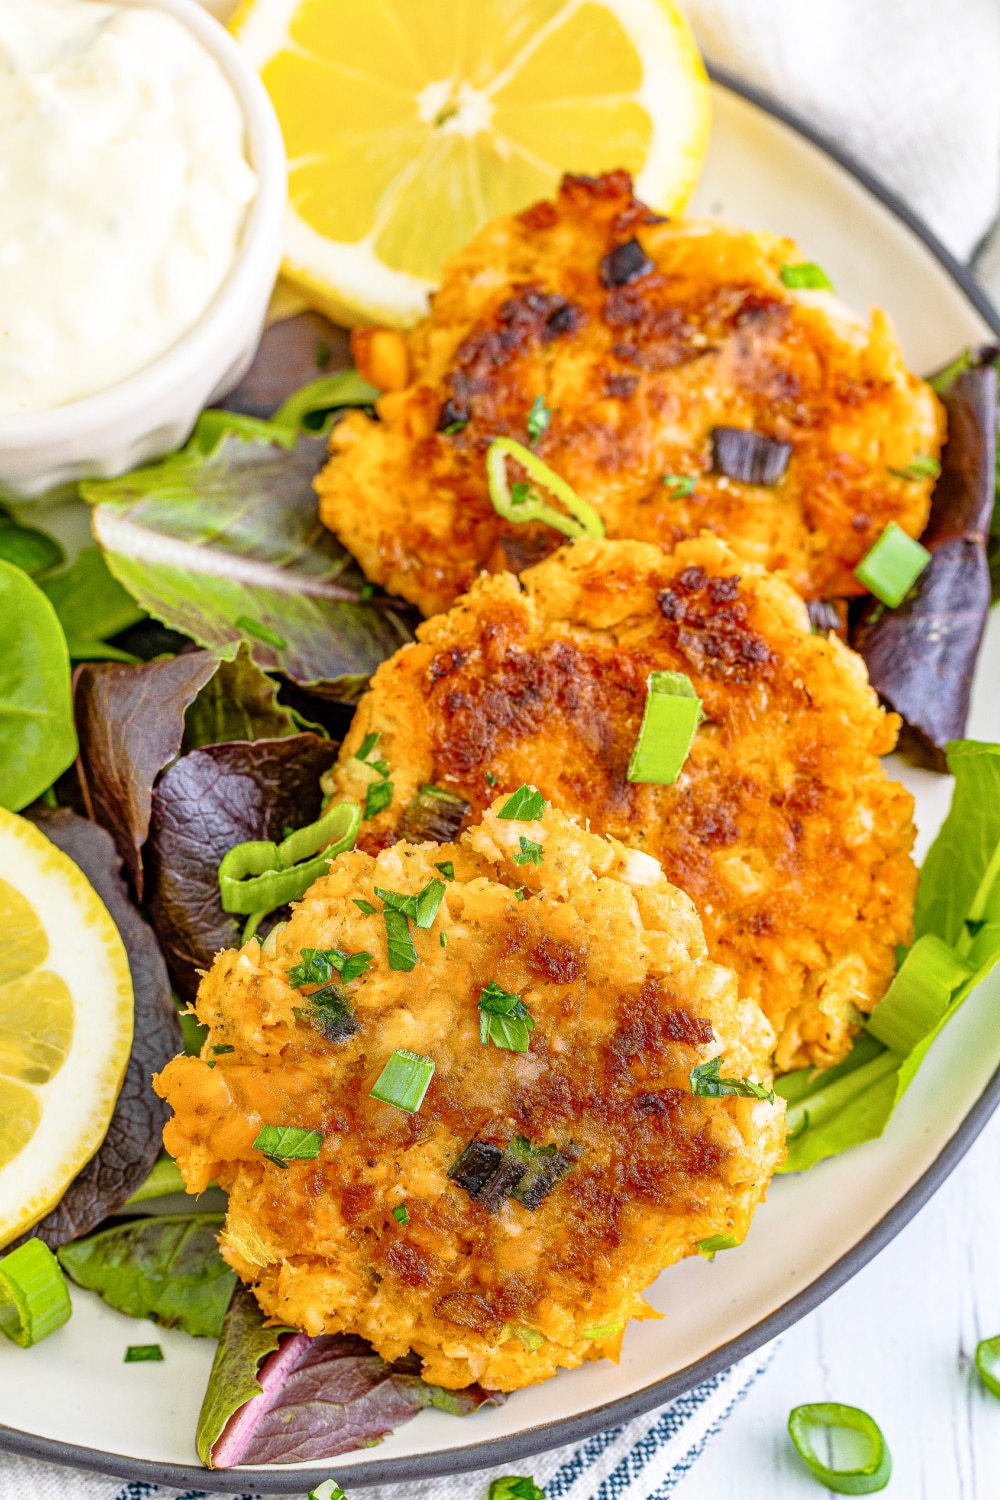 Three salmon patties lay on a bed of greens next to lemon slices and a cup of tater sauce.